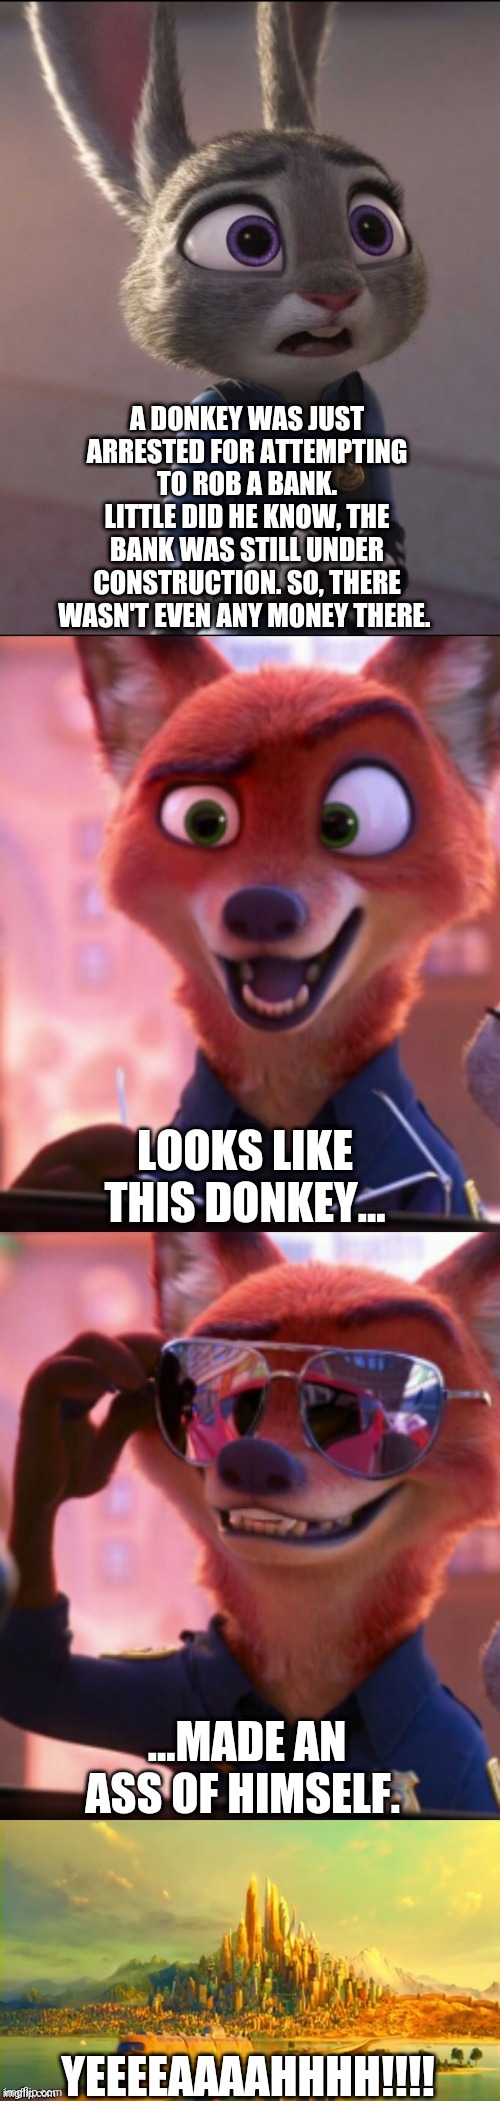 CSI: Zootopia 27 | A DONKEY WAS JUST ARRESTED FOR ATTEMPTING TO ROB A BANK. LITTLE DID HE KNOW, THE BANK WAS STILL UNDER CONSTRUCTION. SO, THERE WASN'T EVEN ANY MONEY THERE. LOOKS LIKE THIS DONKEY... ...MADE AN ASS OF HIMSELF. YEEEEAAAAHHHH!!!! | image tagged in csi zootopia,zootopia,judy hopps,nick wilde,parody,funny | made w/ Imgflip meme maker